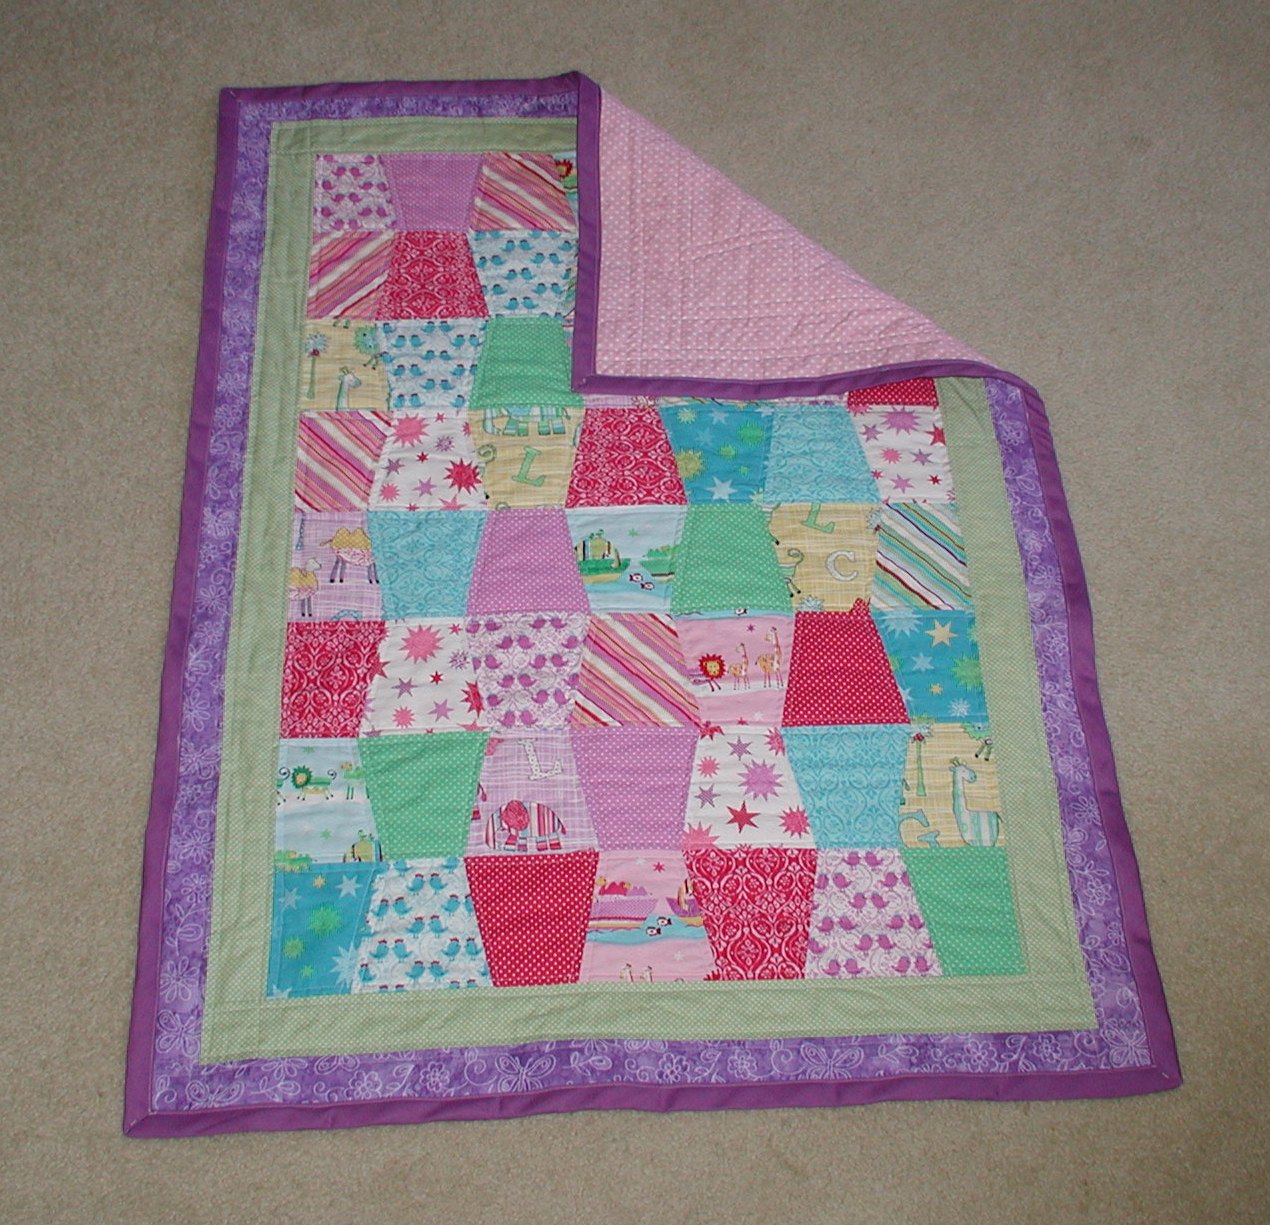 Second Pieced Tumbler Baby Quilt - Quiltingboard Forums